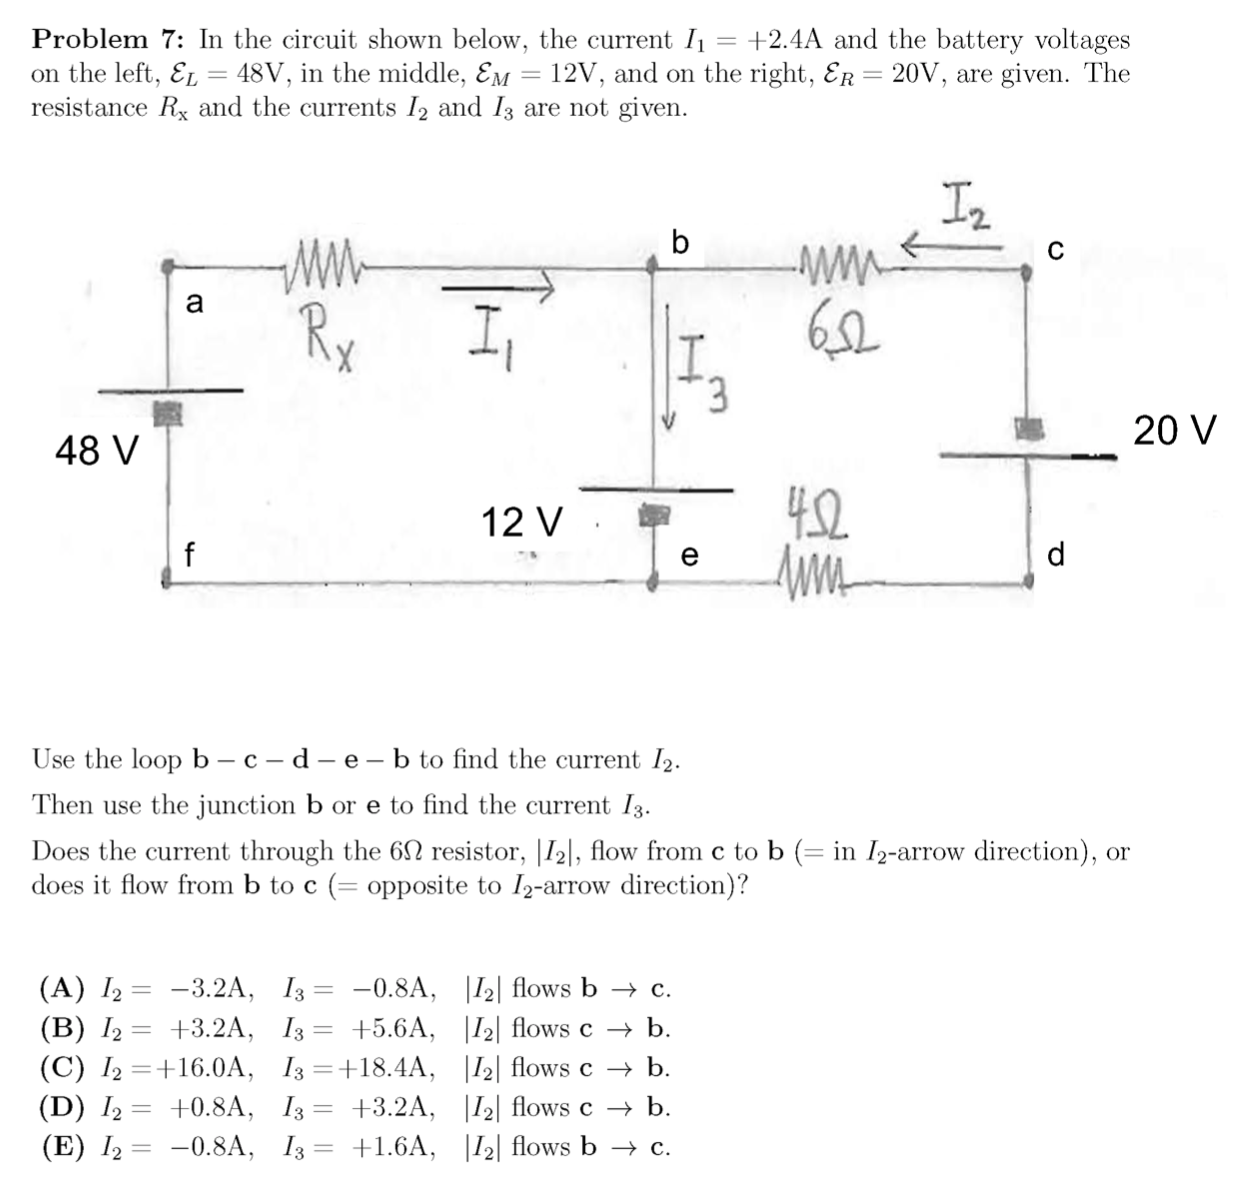 Problem 7: In the circuit shown below, the current I1
on the left, E1 = 48V, in the middle, Em = 12V, and on the right, Er = 20V, are given. The
resistance Rx and the currents I2 and I3 are not given.
+2.4A and the battery voltages
I2
b
Rx
I,
I.
3.
20 V
48 V
42
12 V
Use the loop b – c – d – e - b to find the current I2.
Then use the junction b or e to find the current I3.
Does the current through the 6N resistor, |I2|, flow from c to b (= in I2-arrow direction), or
does it flow from b to c (= opposite to I2-arrow direction)?
%3D
(A) I2
(B) I2
(C) I2 =+16.0A, I3=+18.4A, |I2| flows c → b.
(D) I,
(E) 12 — -0.8A, 13 — +1.6A, |12| flows ь — с.
-3.2A, I3 = -0.8A, |I2| flows b → c.
+3.2A, I3 = +5.6A, |I2| flows c → b.
%3D
+0.8A, I3 = +3.2A, |I2| flows c → b.
